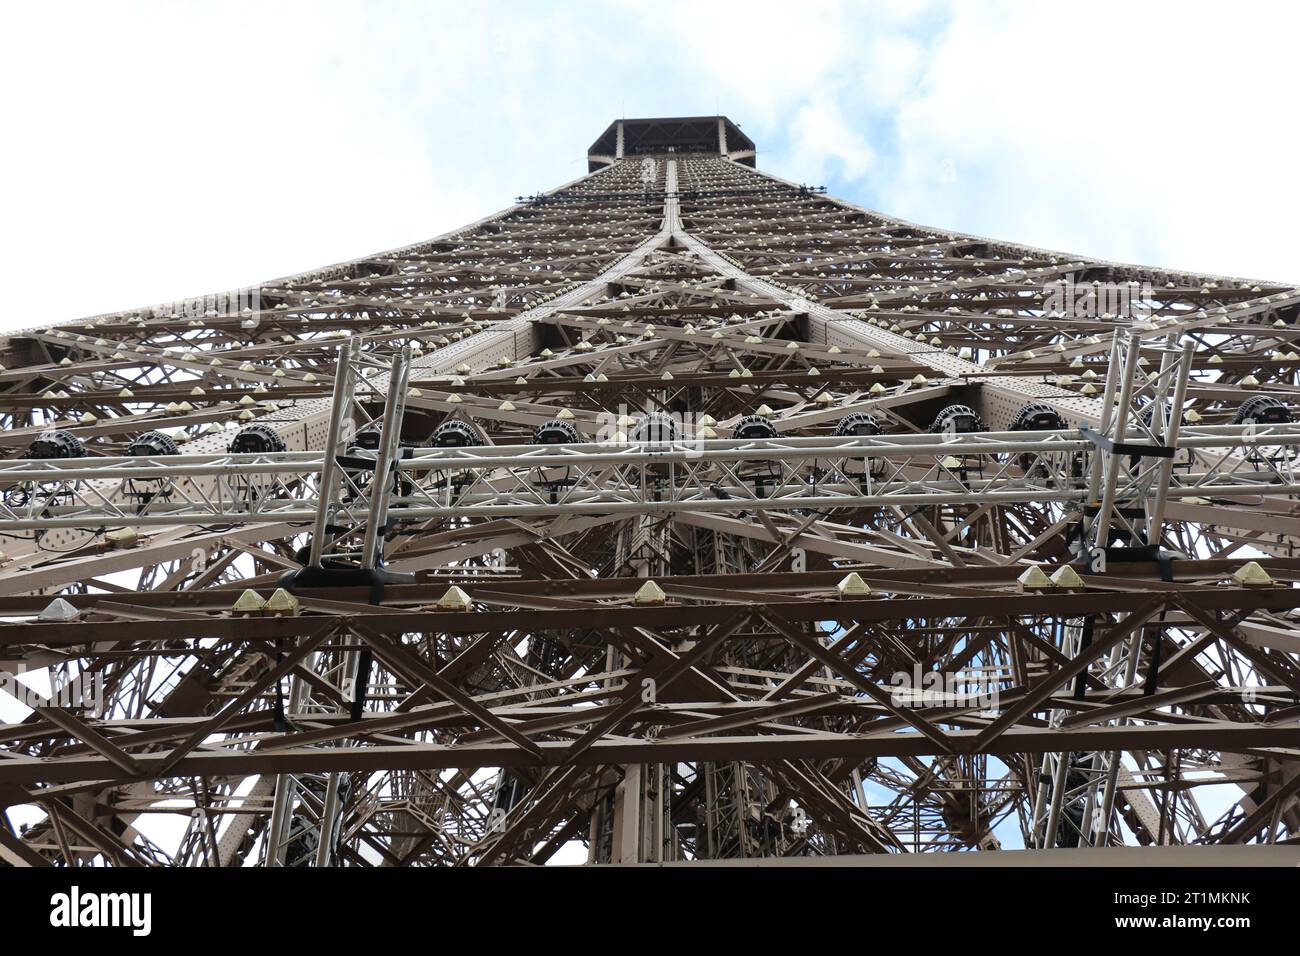 Symmetrical and close-up view of eiffel tower showcasing its architecture and built-up Stock Photo